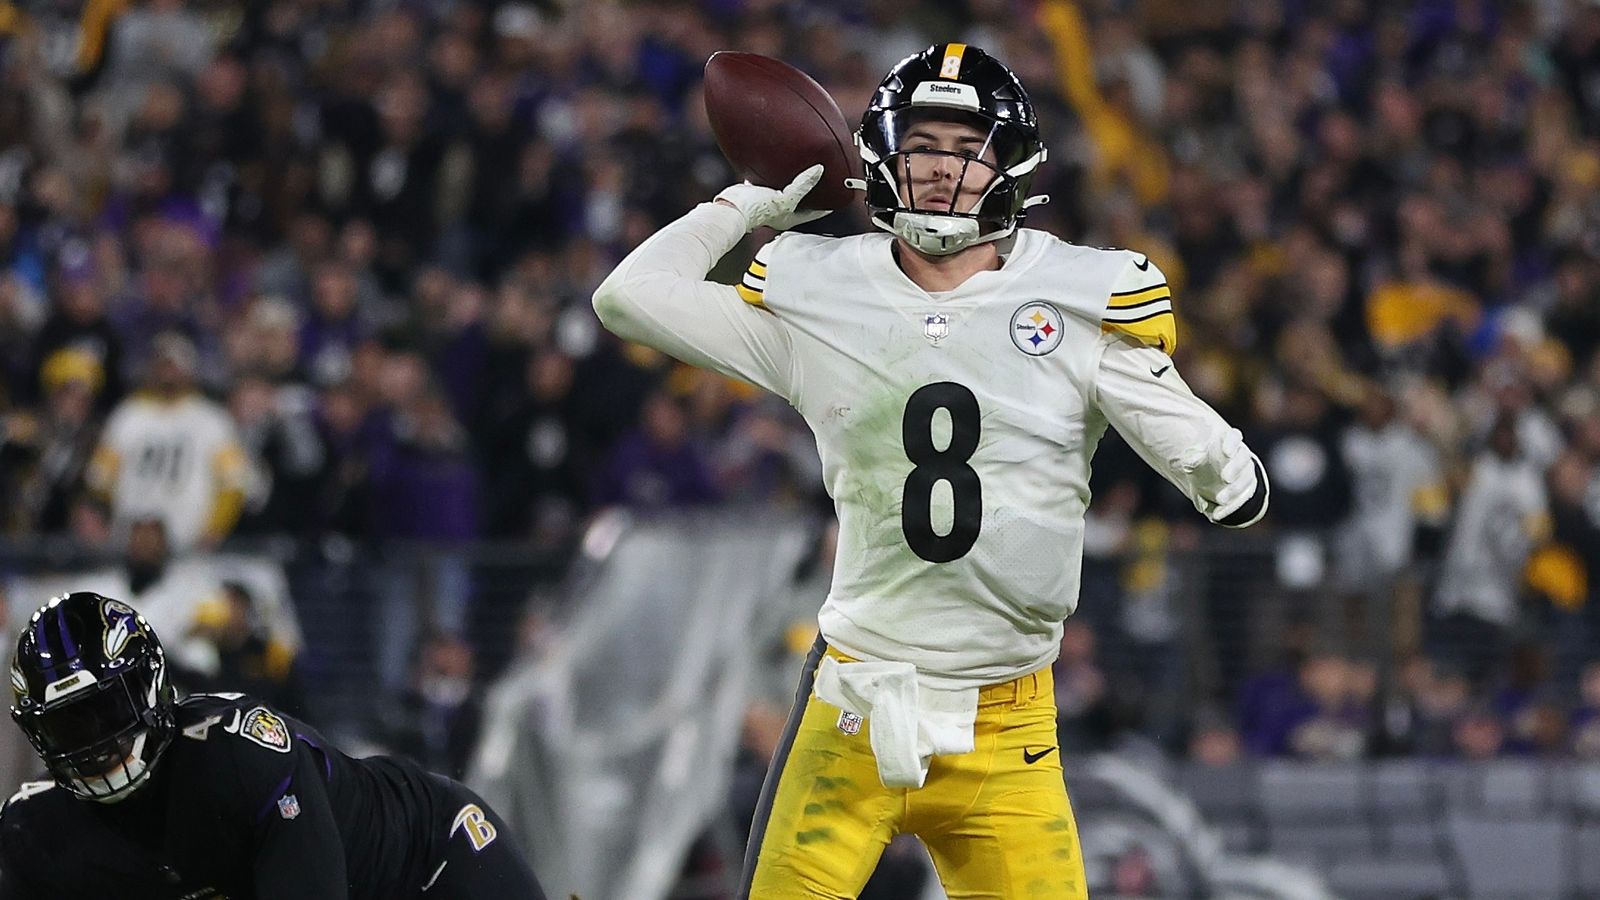 2022 NFL Draft: Steelers get offensive answers in latest 2-Round